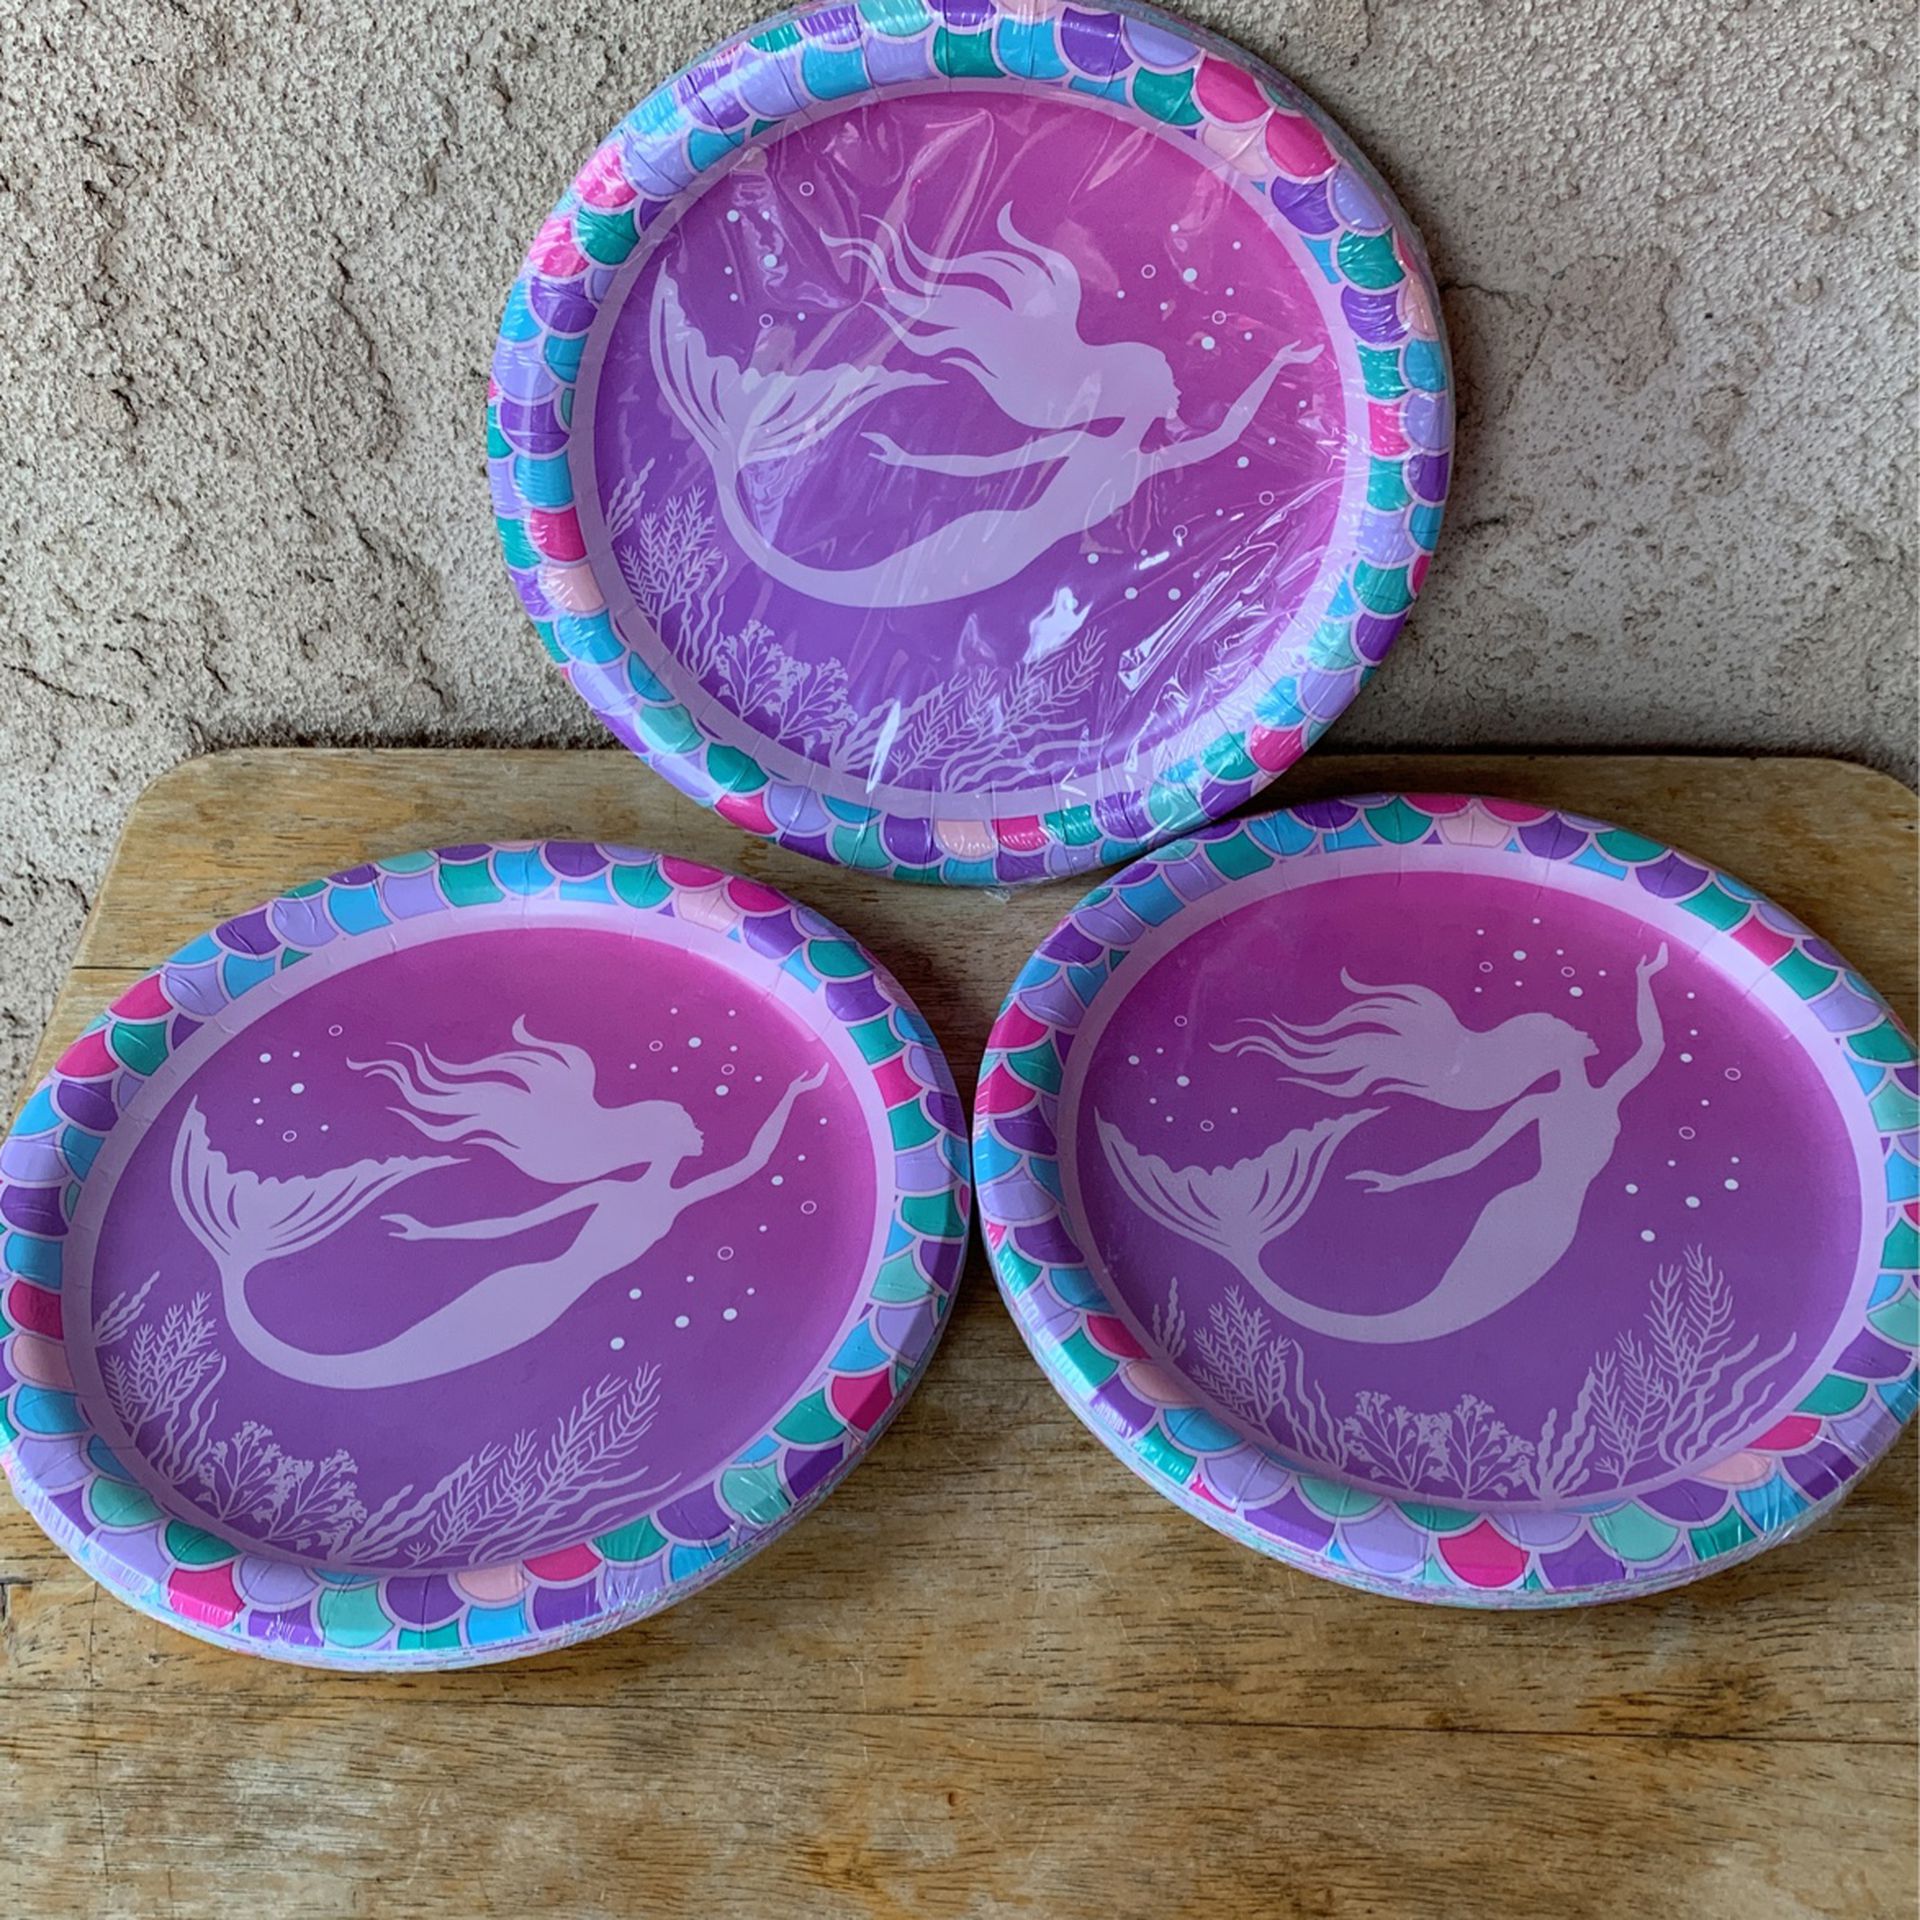 MERMAID PARTY DECORATIONS,MERMAID PARTY FAVORS MERMAID CANDLE AND MORE